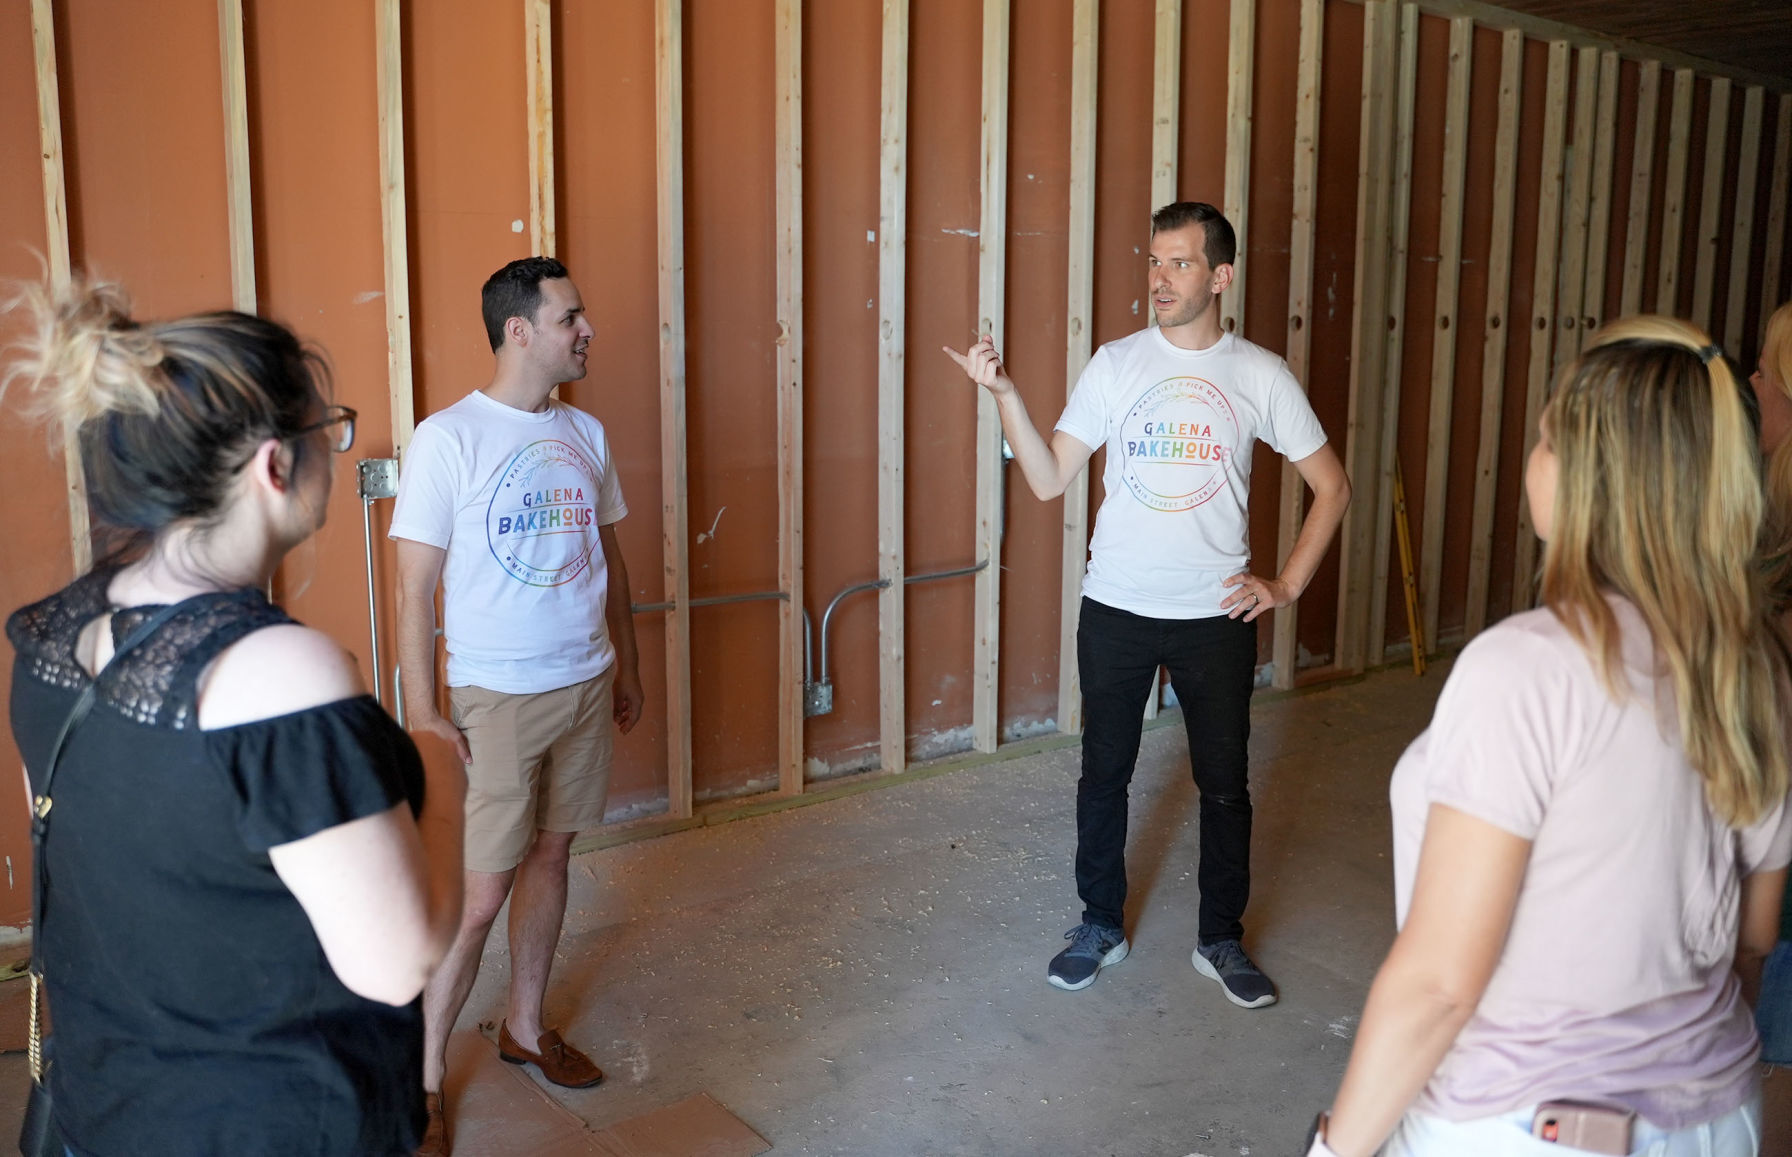 Owners, Alex Arroyo (left) and Geoff Karnish give a tour of the current interior of the Galena Bakehouse at 421 S. Main St. in Galena, Ill. They plan to be open for business in early August. Photo taken on Saturday, June 19, 2021.    PHOTO CREDIT: PAUL KURUTSIDES